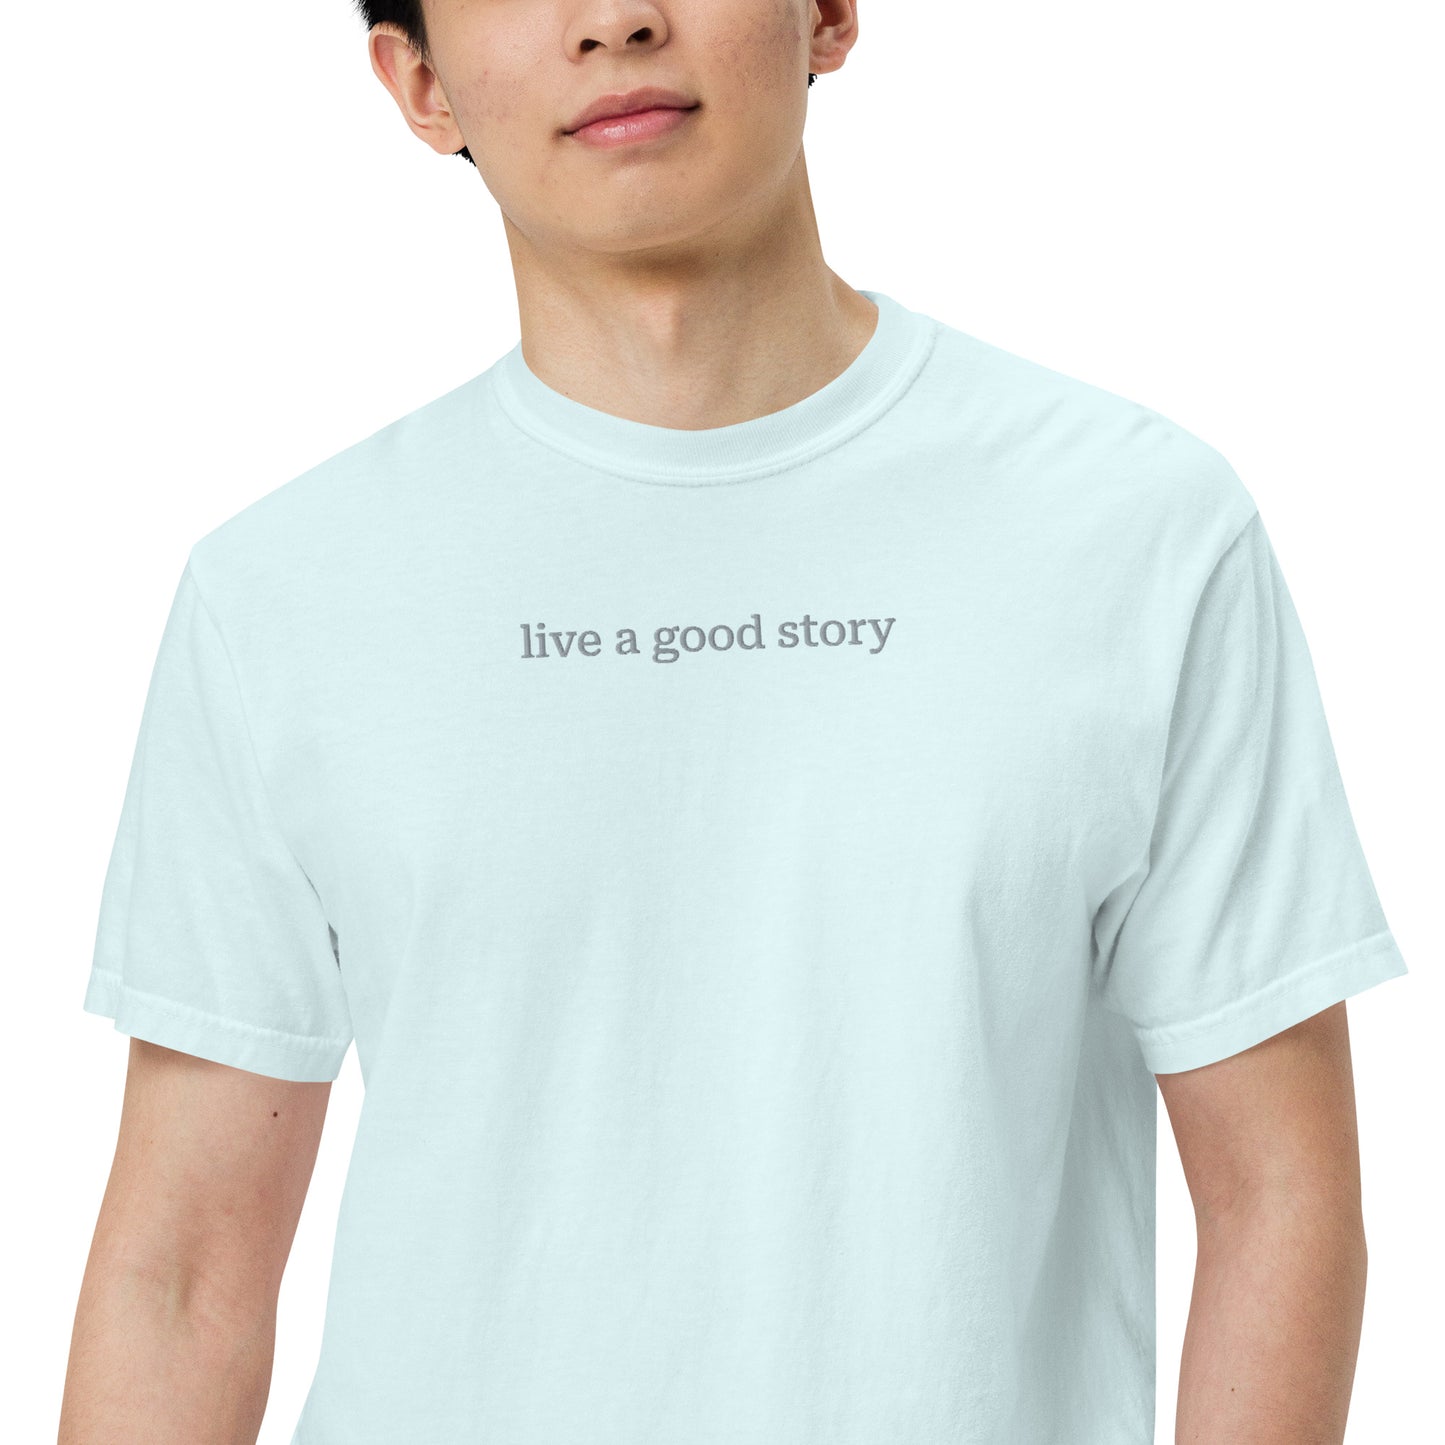 Embroidered Comfort Colors "live a good story" garment-dyed heavyweight t-shirt